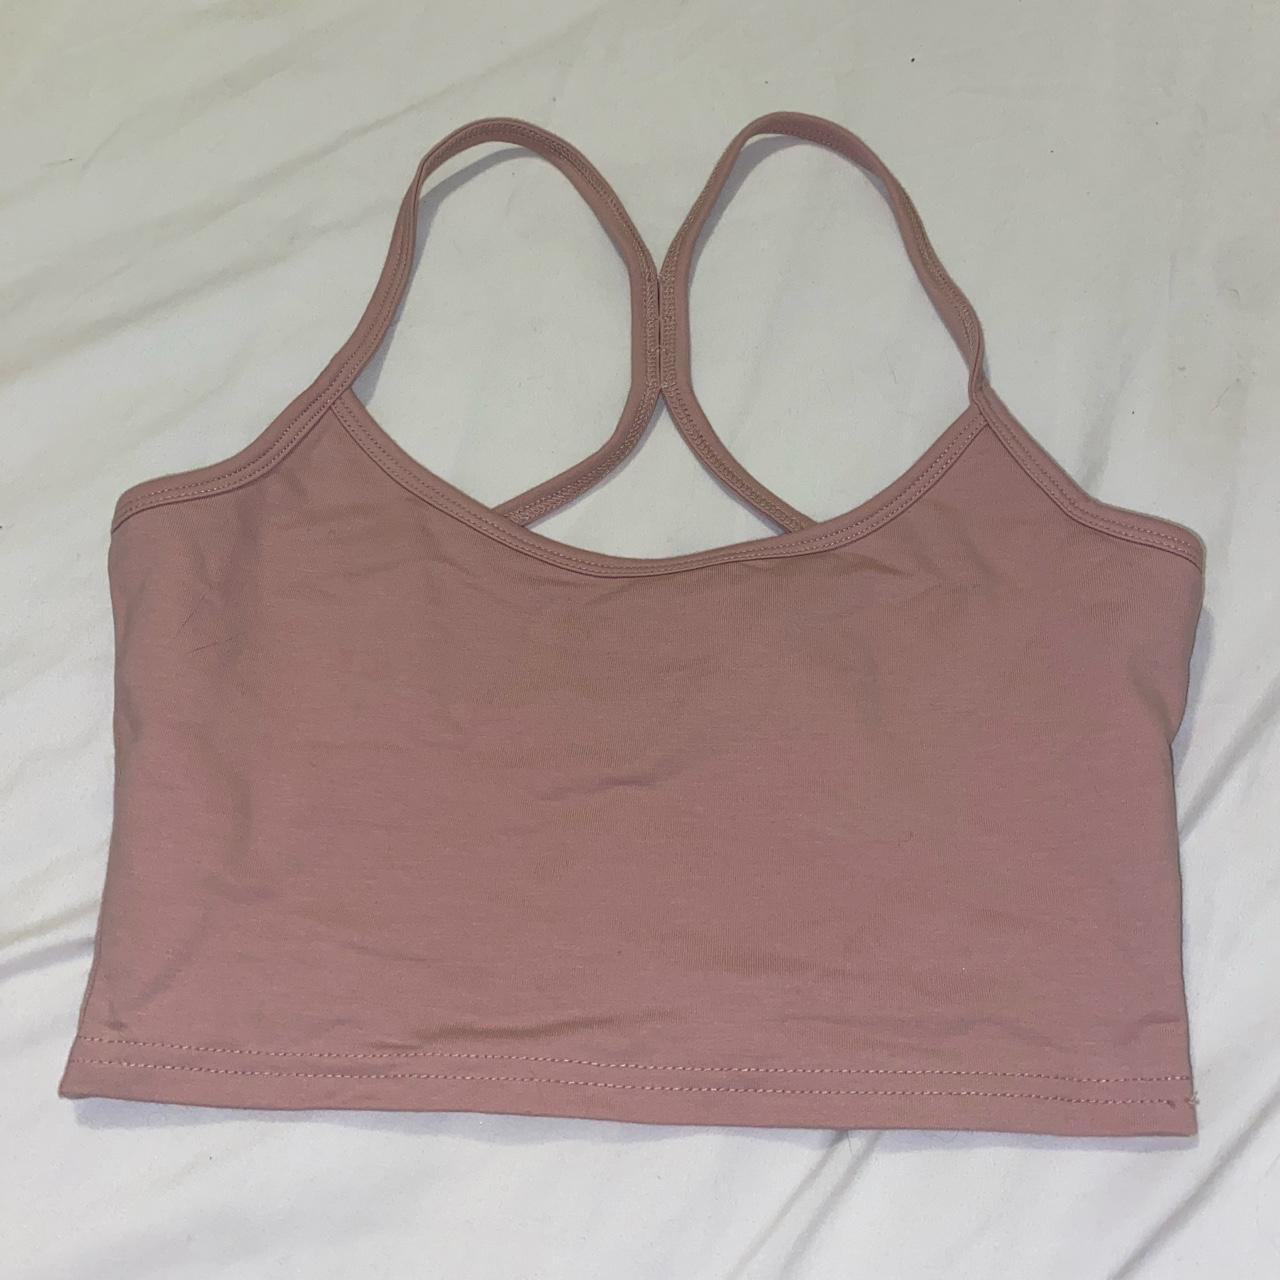 CSB Lowcut Sports Bra Size XS Message before buying 🤍 - Depop